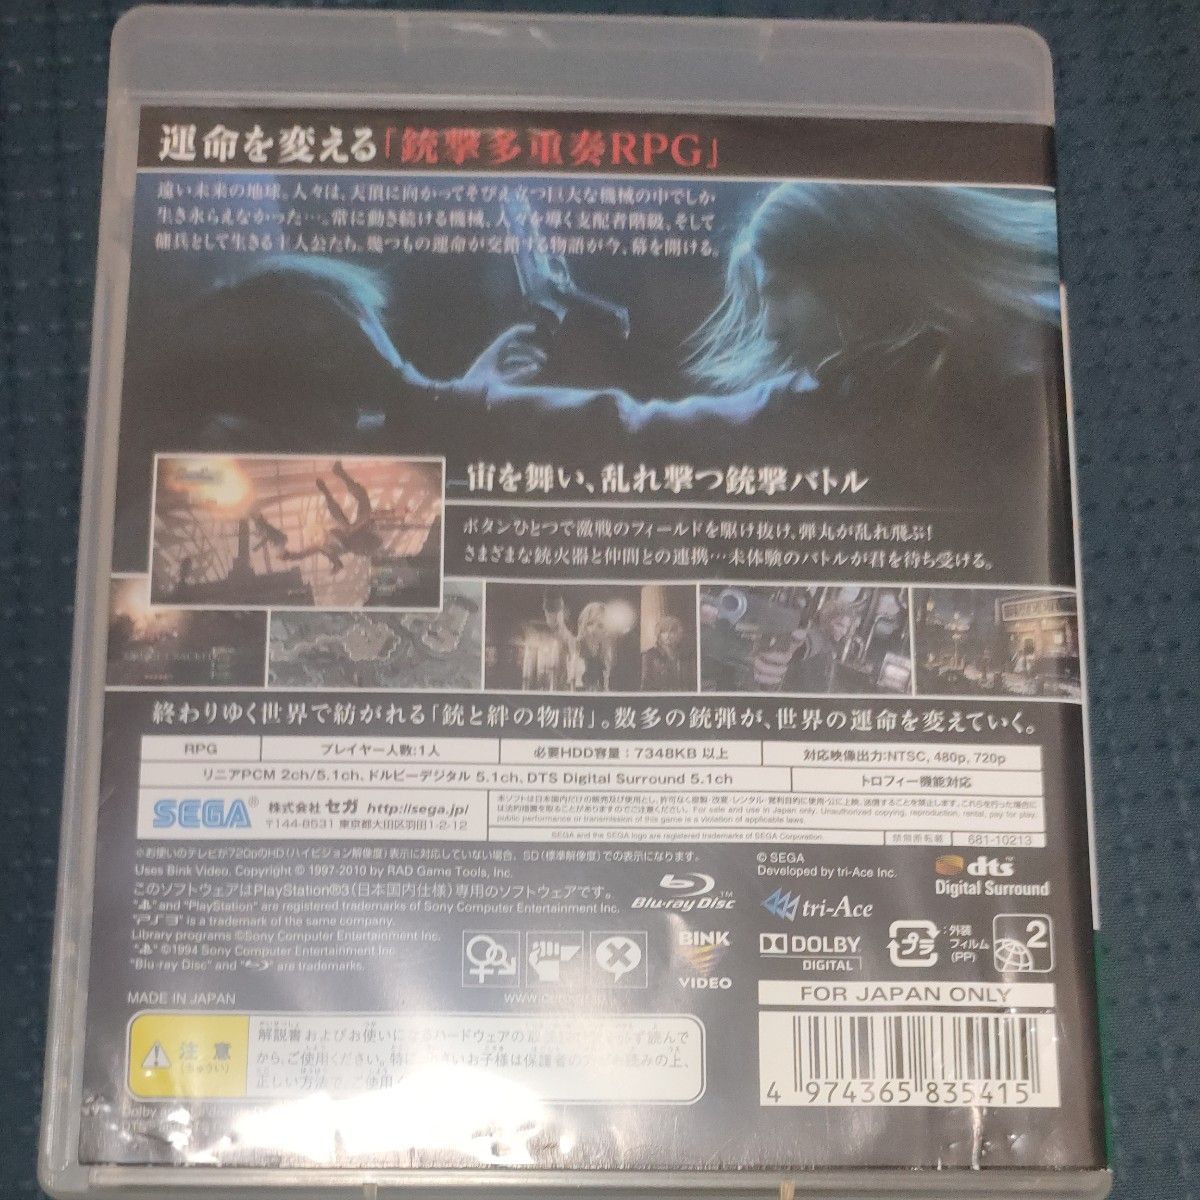 【PS3】 End of Eternity [通常版］